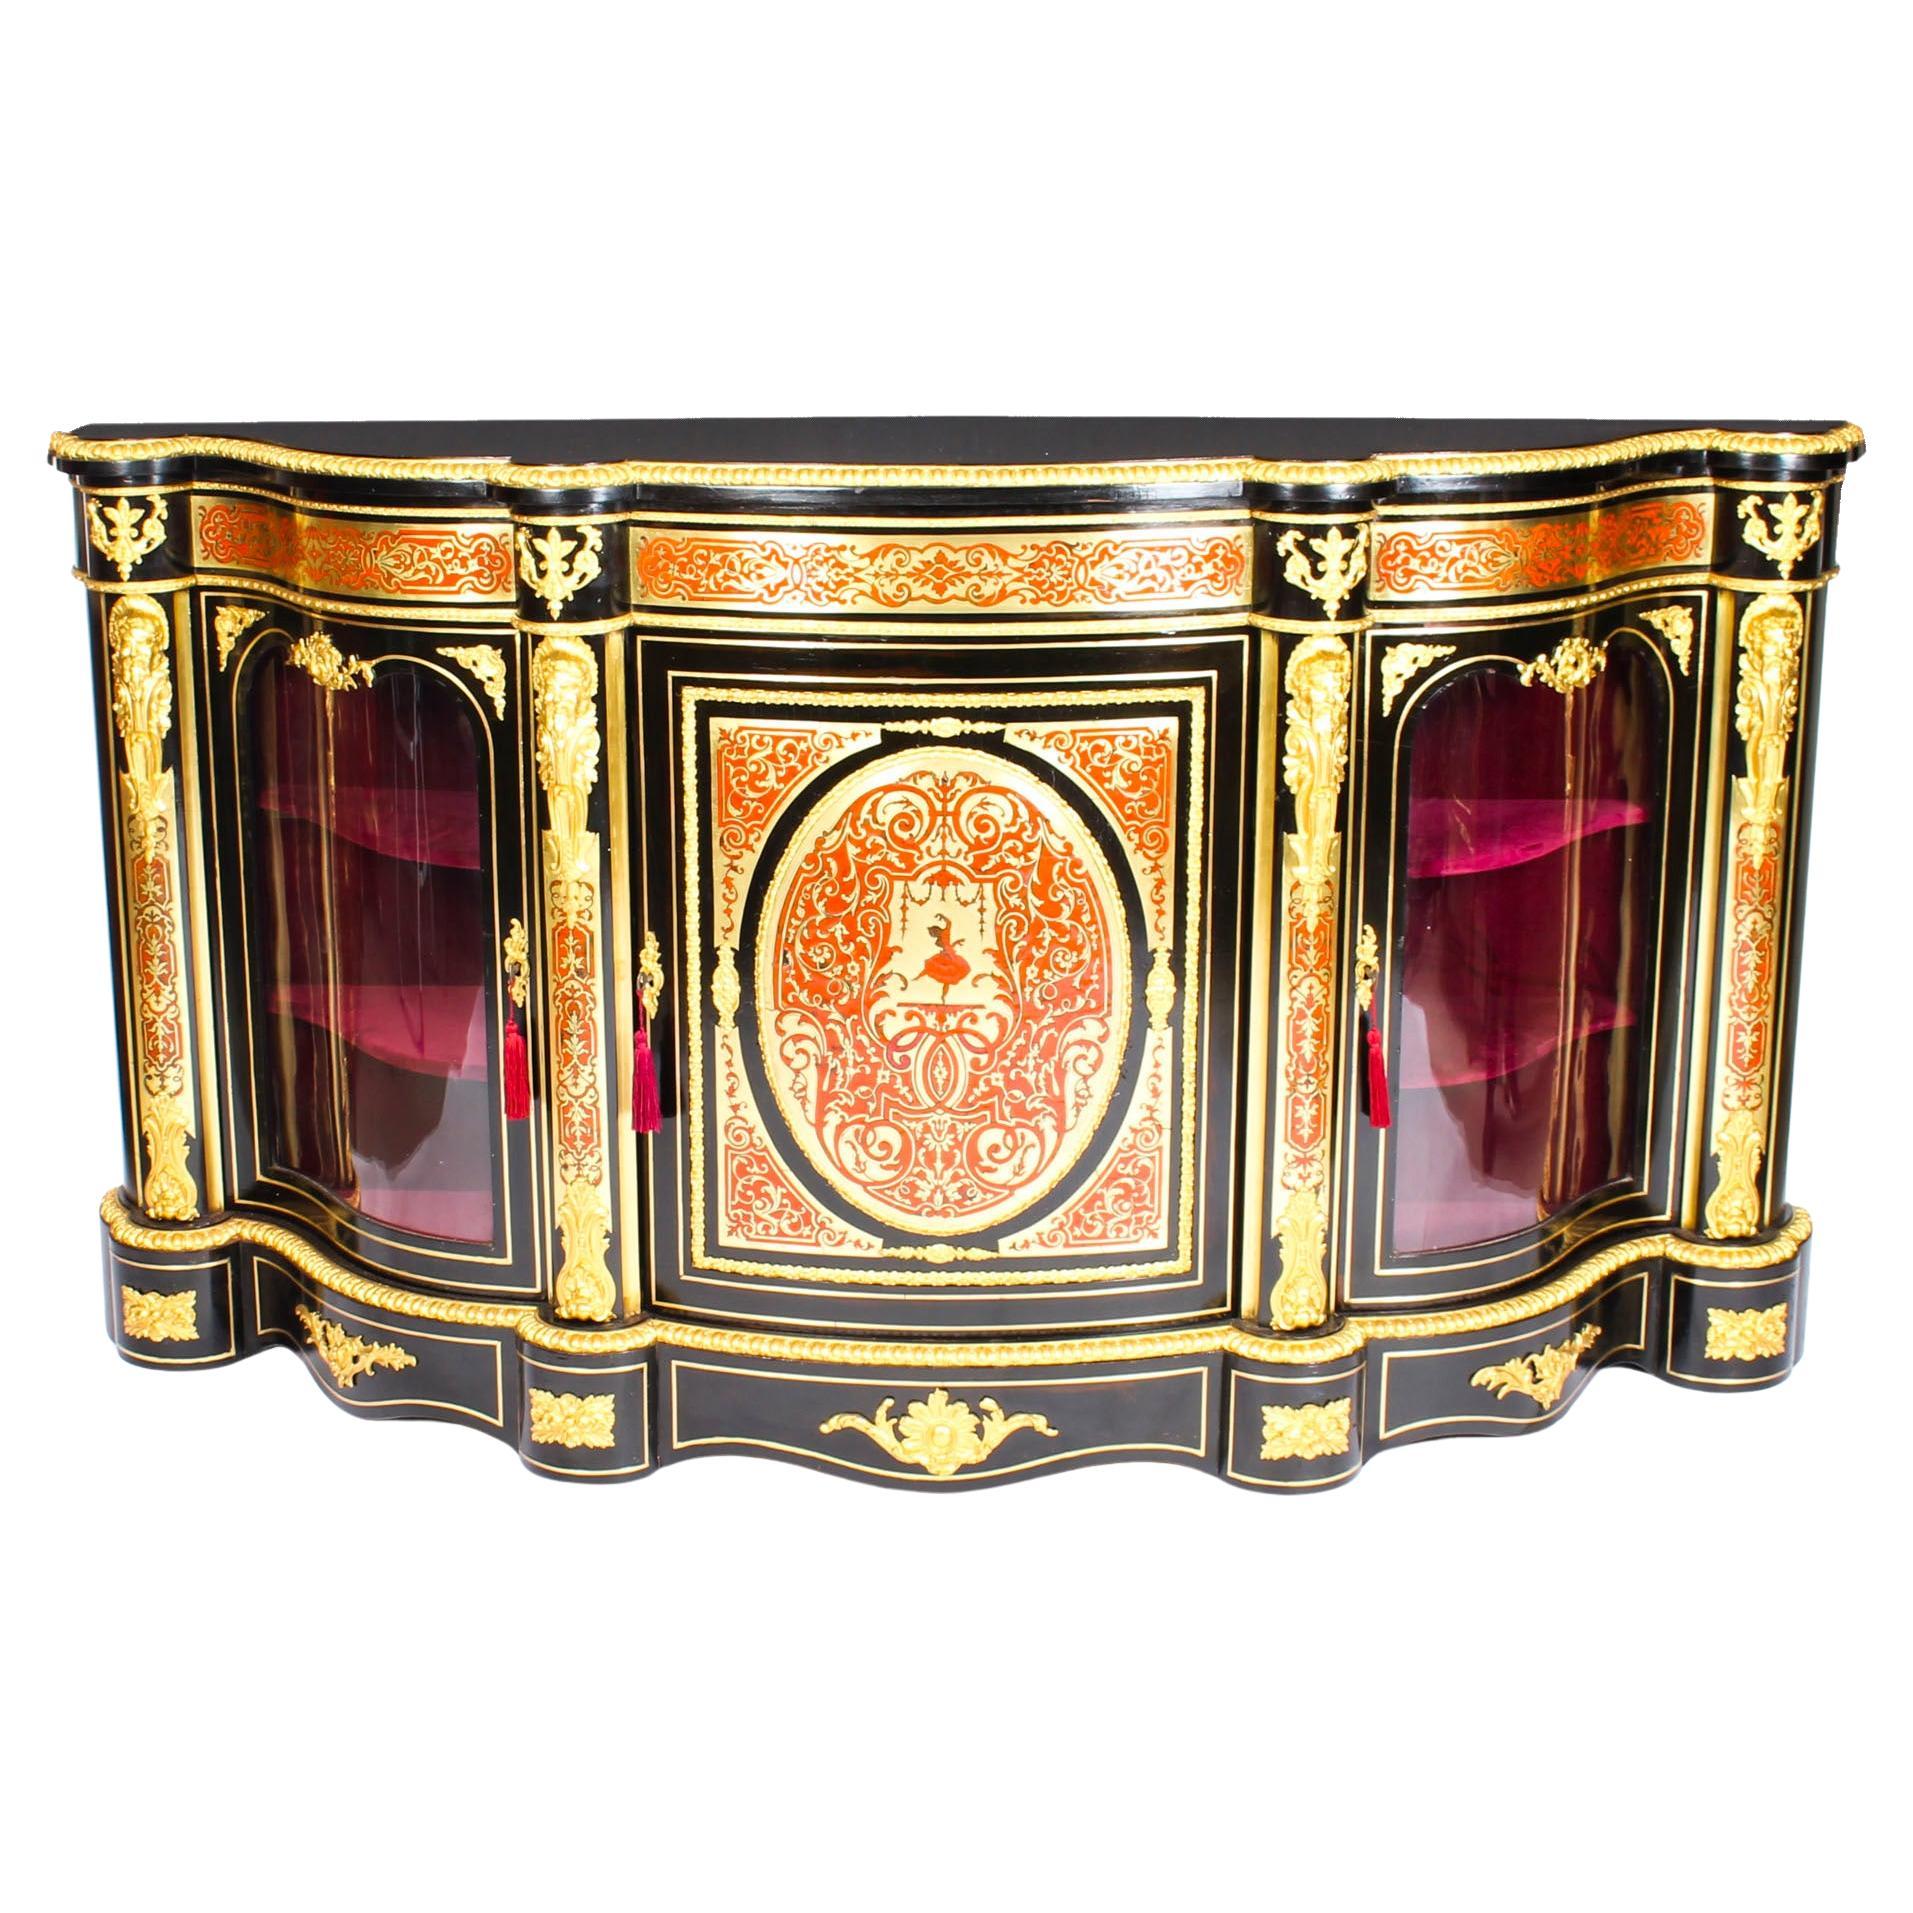 Antique Ormolu Mounted Serpentine Boulle Credenza, 19th Century For Sale